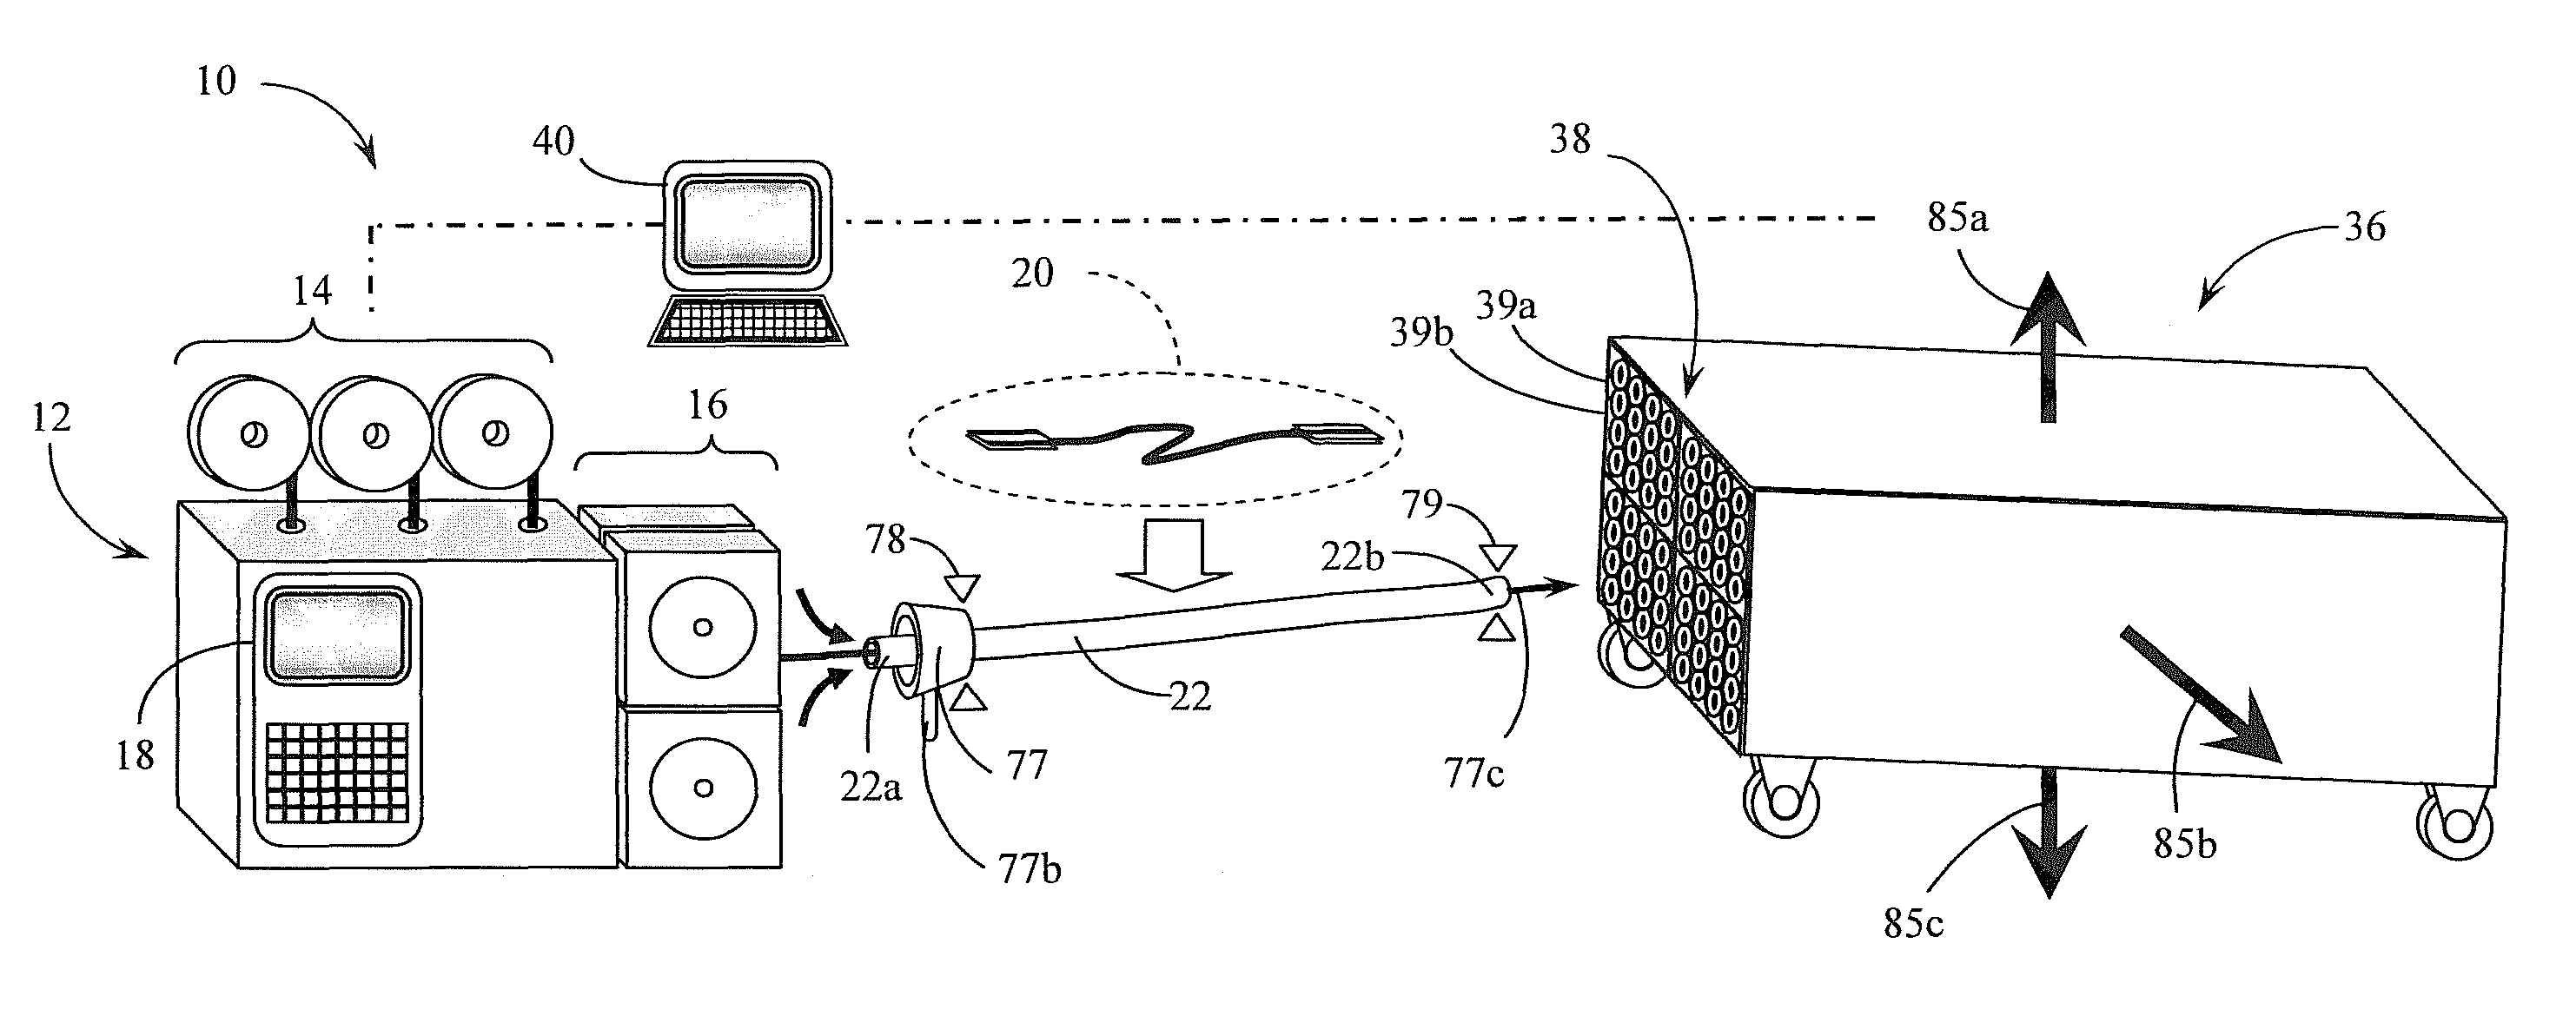 Integrated wire harness batch production systems and methods